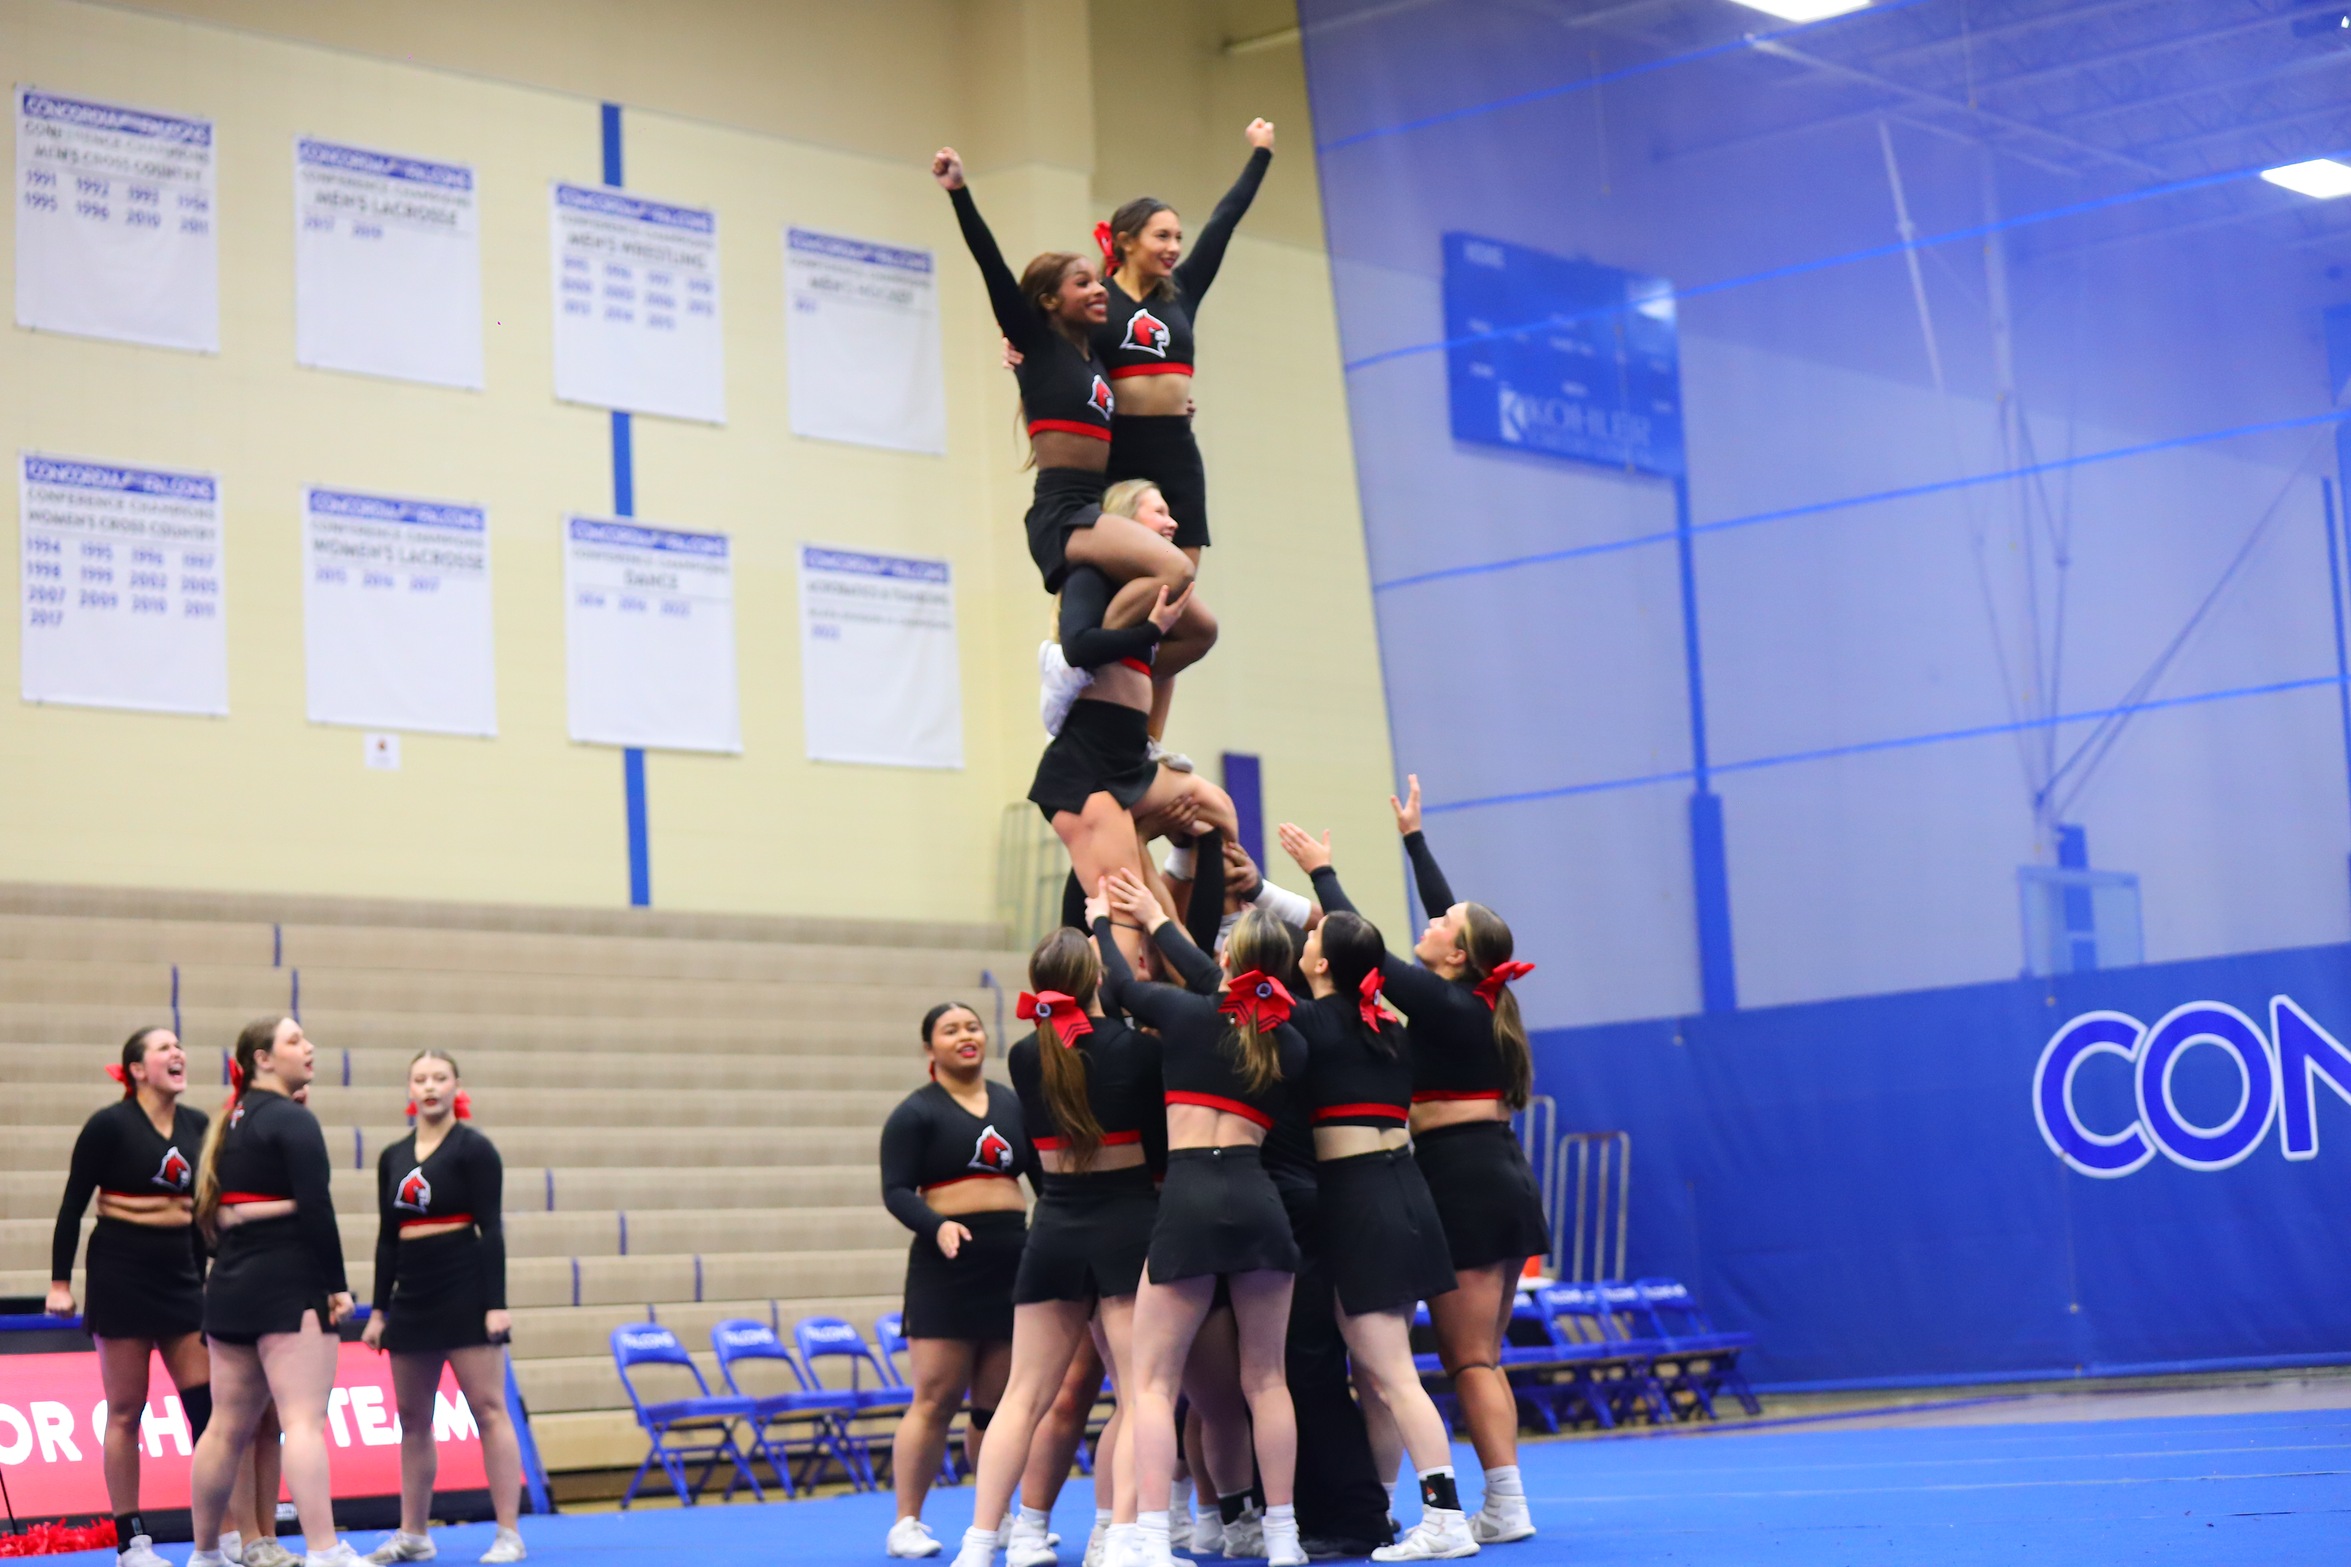 Cheer flies high at home with first place finish at Cardinal Invite